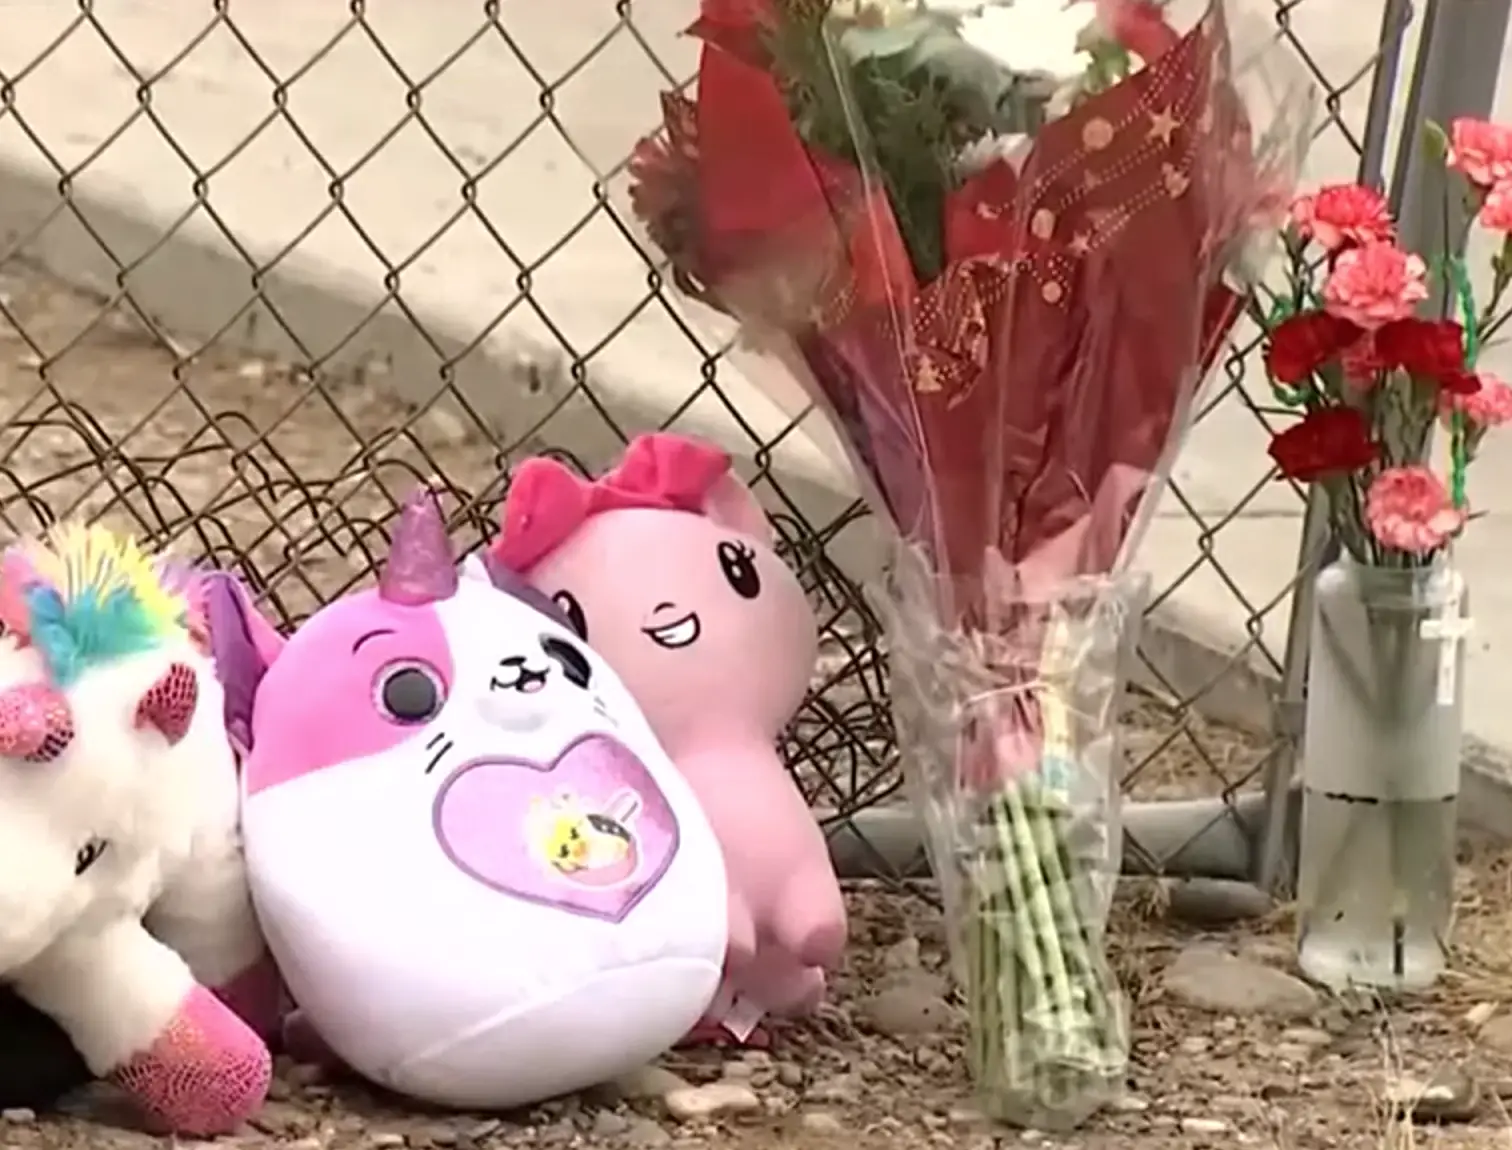 Flowers and stuffed animals around the house that caught on fire and killed five children | Source: Youtube.com/AZFamily | Arizona News